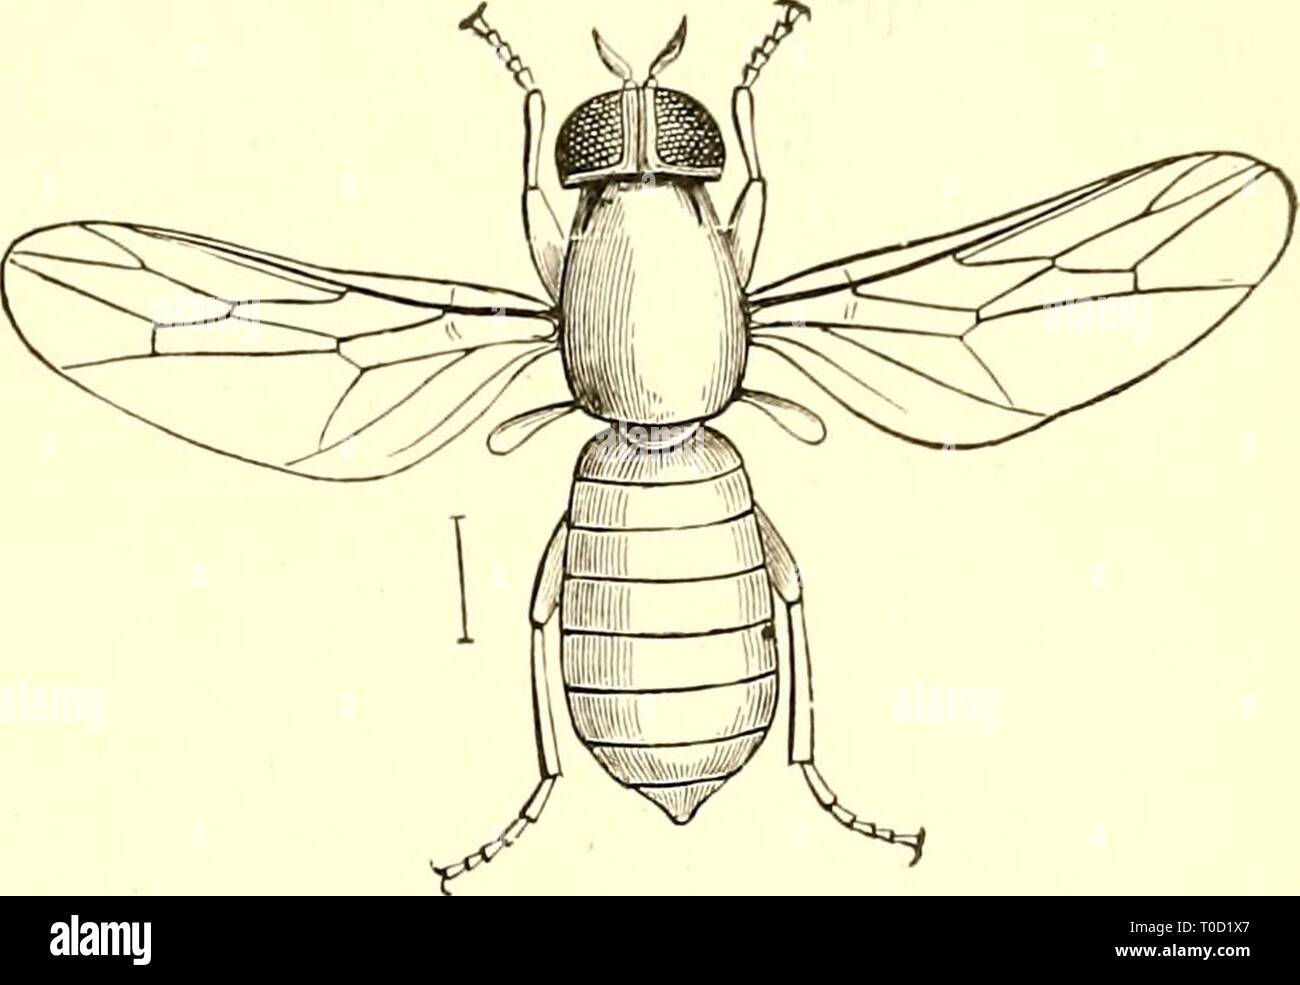 Economic entomology for the farmer Economic entomology for the farmer and fruit-grower [microform] : and for use as a text-book in agricultural schools and colleges economicentomolo00insmit Year: 1896  TttE INSECT WORLD. 347    Sceuopiniis fenestralis. of fact it is predaceous in habit, and feeds upon the species really infesting carpets and similar material. Thus, 'moths,' the larvae of the 'carpet-beetle,' 'fish-moths,' and numerous other insects likely to occur in such situa- ^'^- 297- tions are destroyed by it. From this larva there comes in due time a small blue fly, a member of the famil Stock Photo